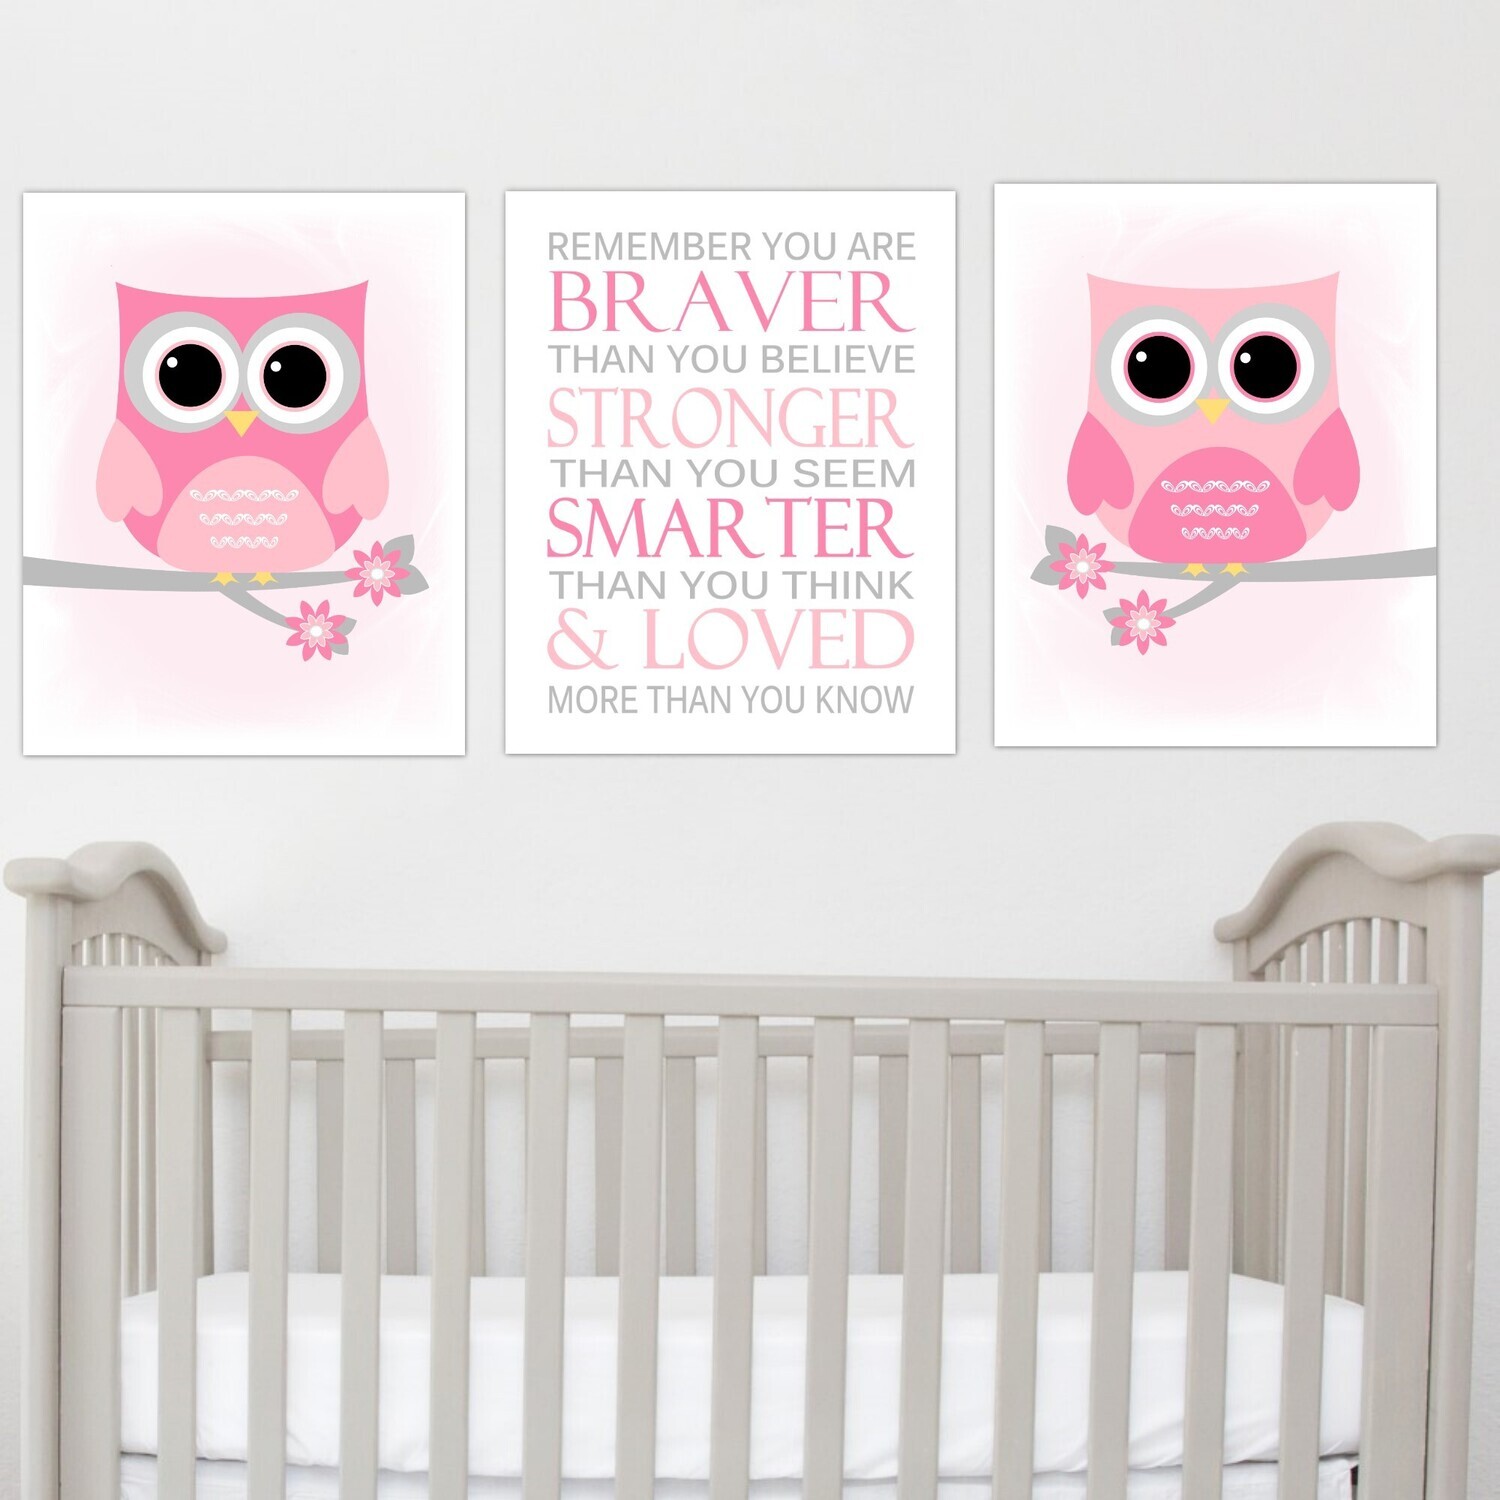 Baby Girl Nursery Wall Art Pink Gray Grey Owls Remember You Are Braver Popular Quotes Birds Flowers Chevron Baby Nursery Decor SET OF 3 UNFRAMED PRINTS